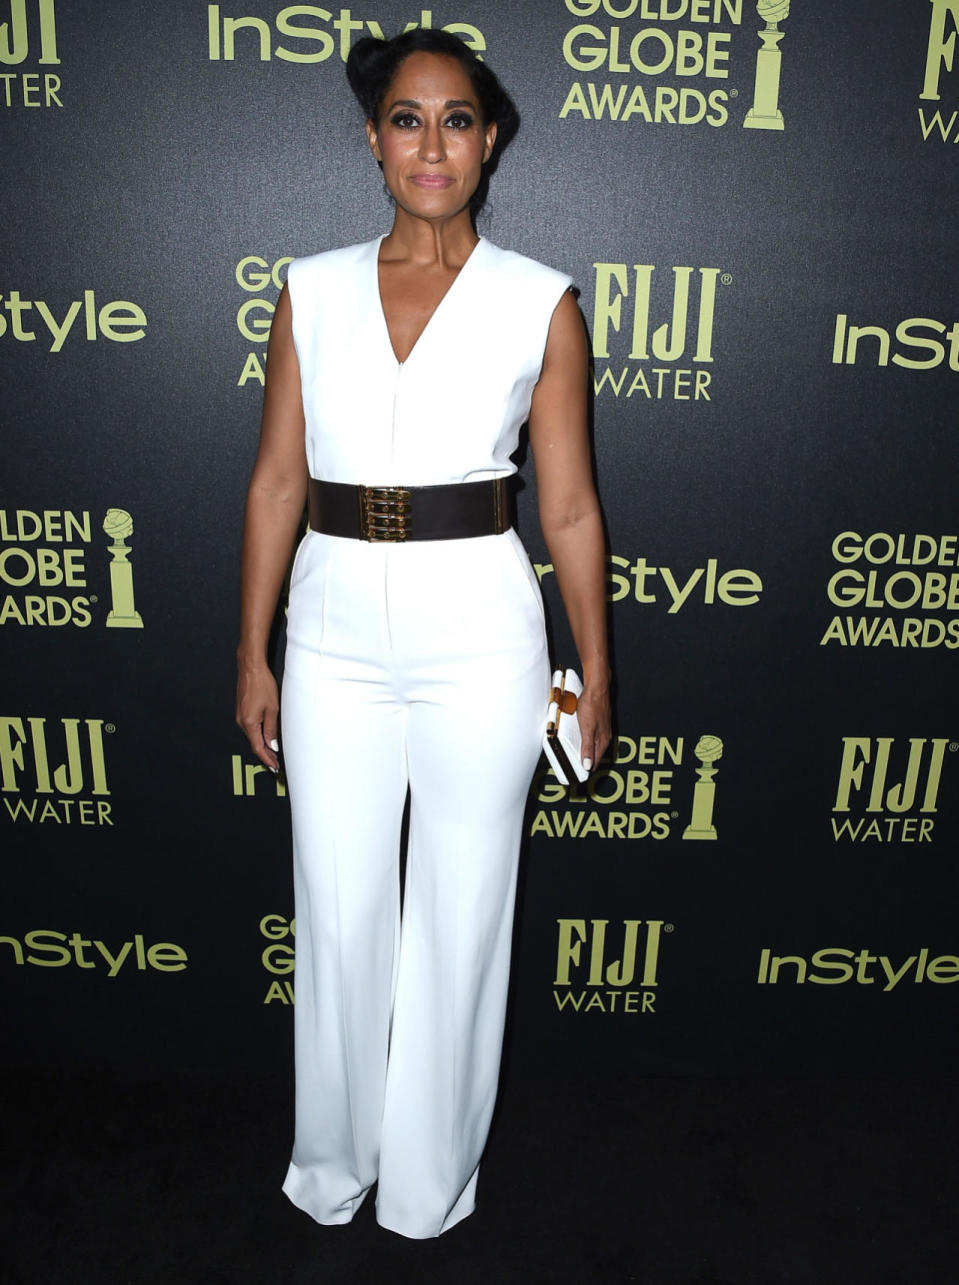 Tracee Ellis Ross was an absolute vision at the InStyle Miss Golden Globes Awards party on Nov. 17, 2015